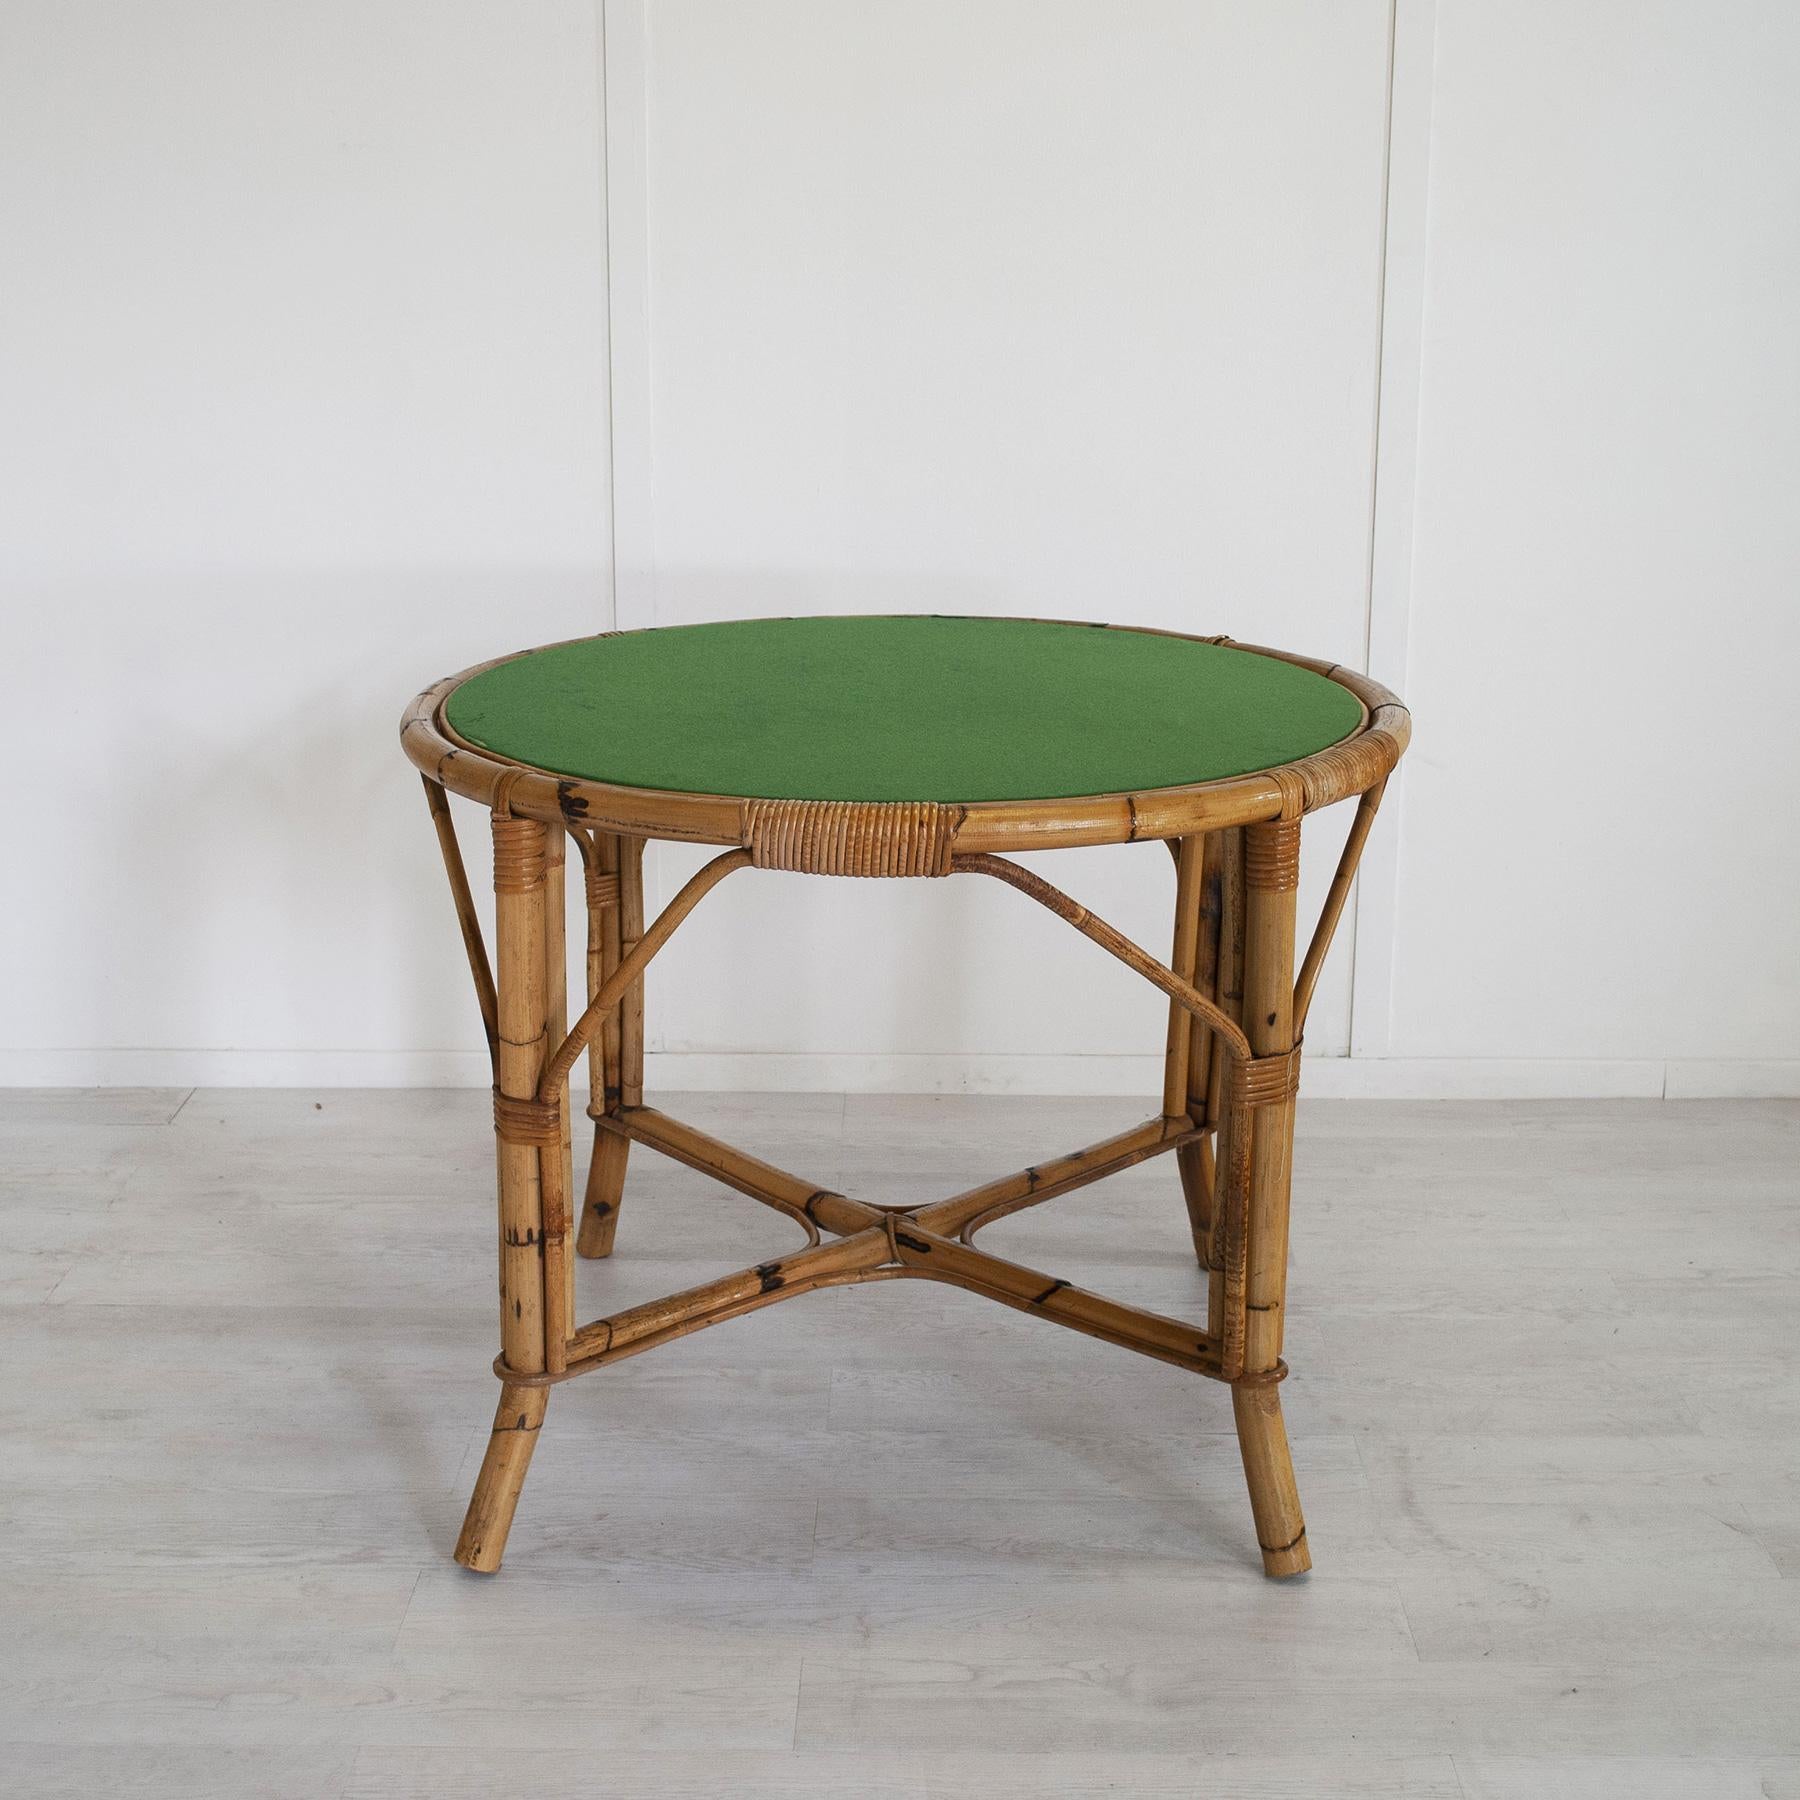 Delightful bamboo table with glass top 1960s